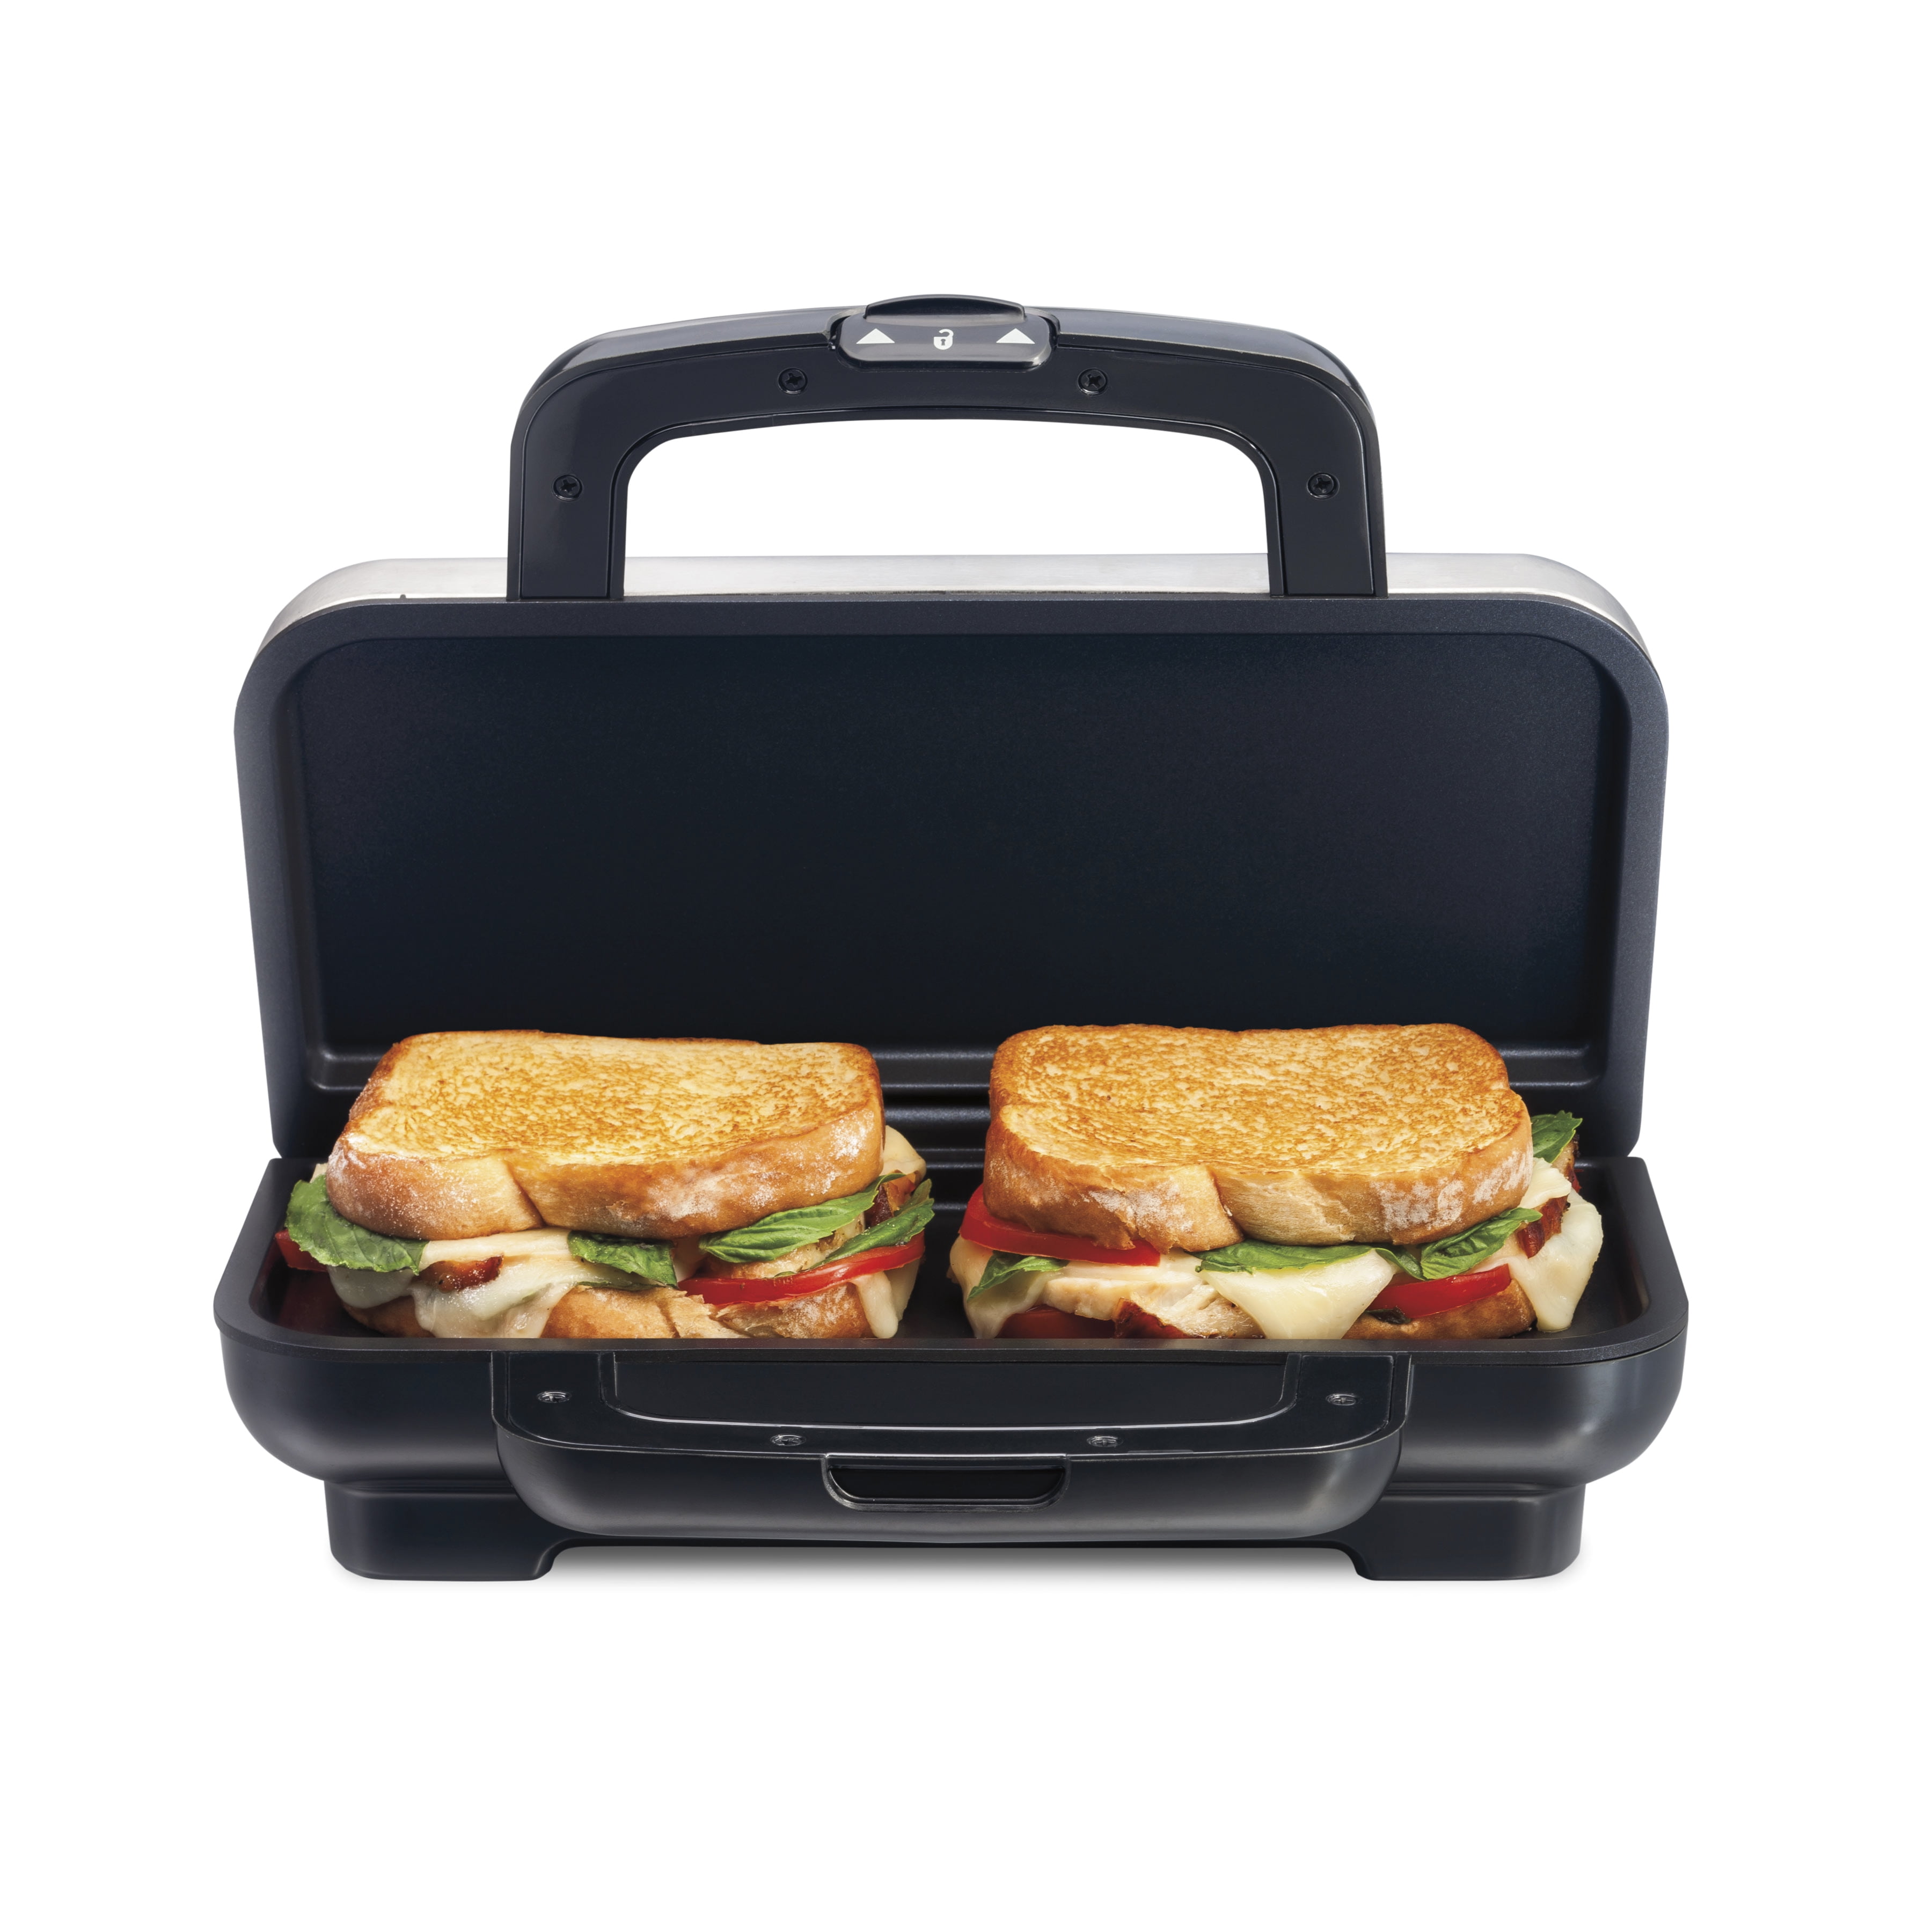 Sandwich Makers for sale in Greer, South Carolina